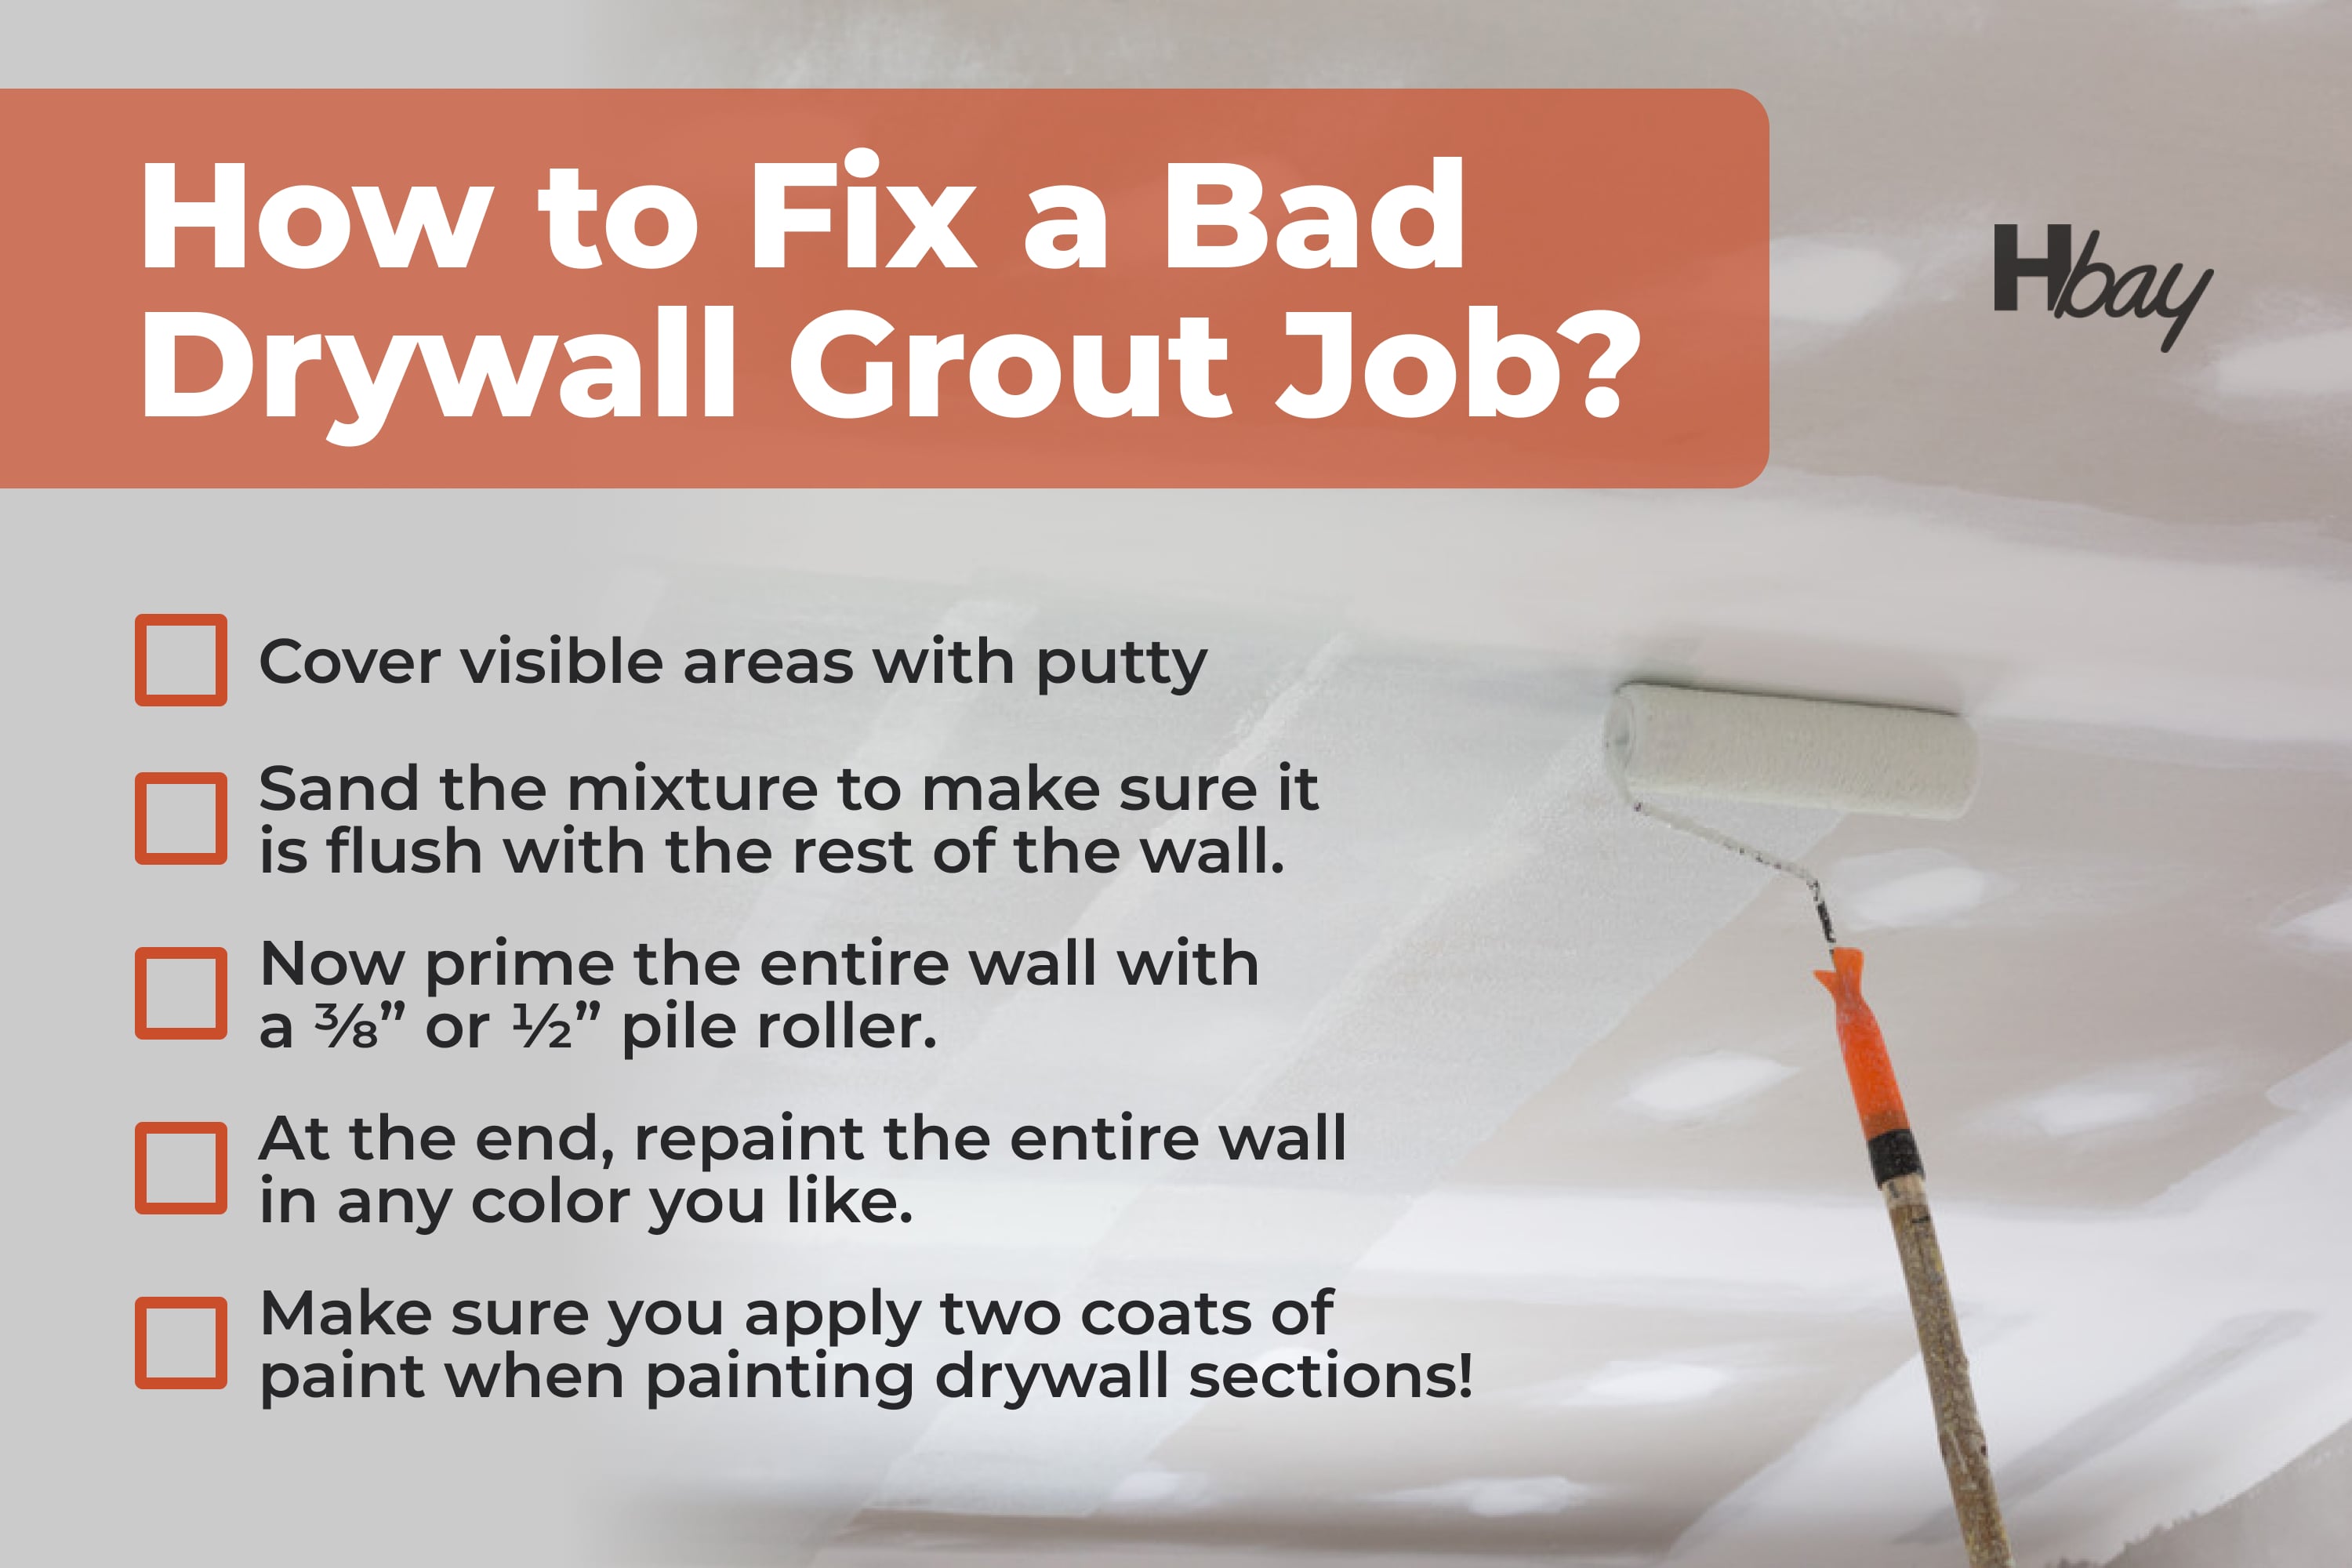 How to fix a bad drywall grout job